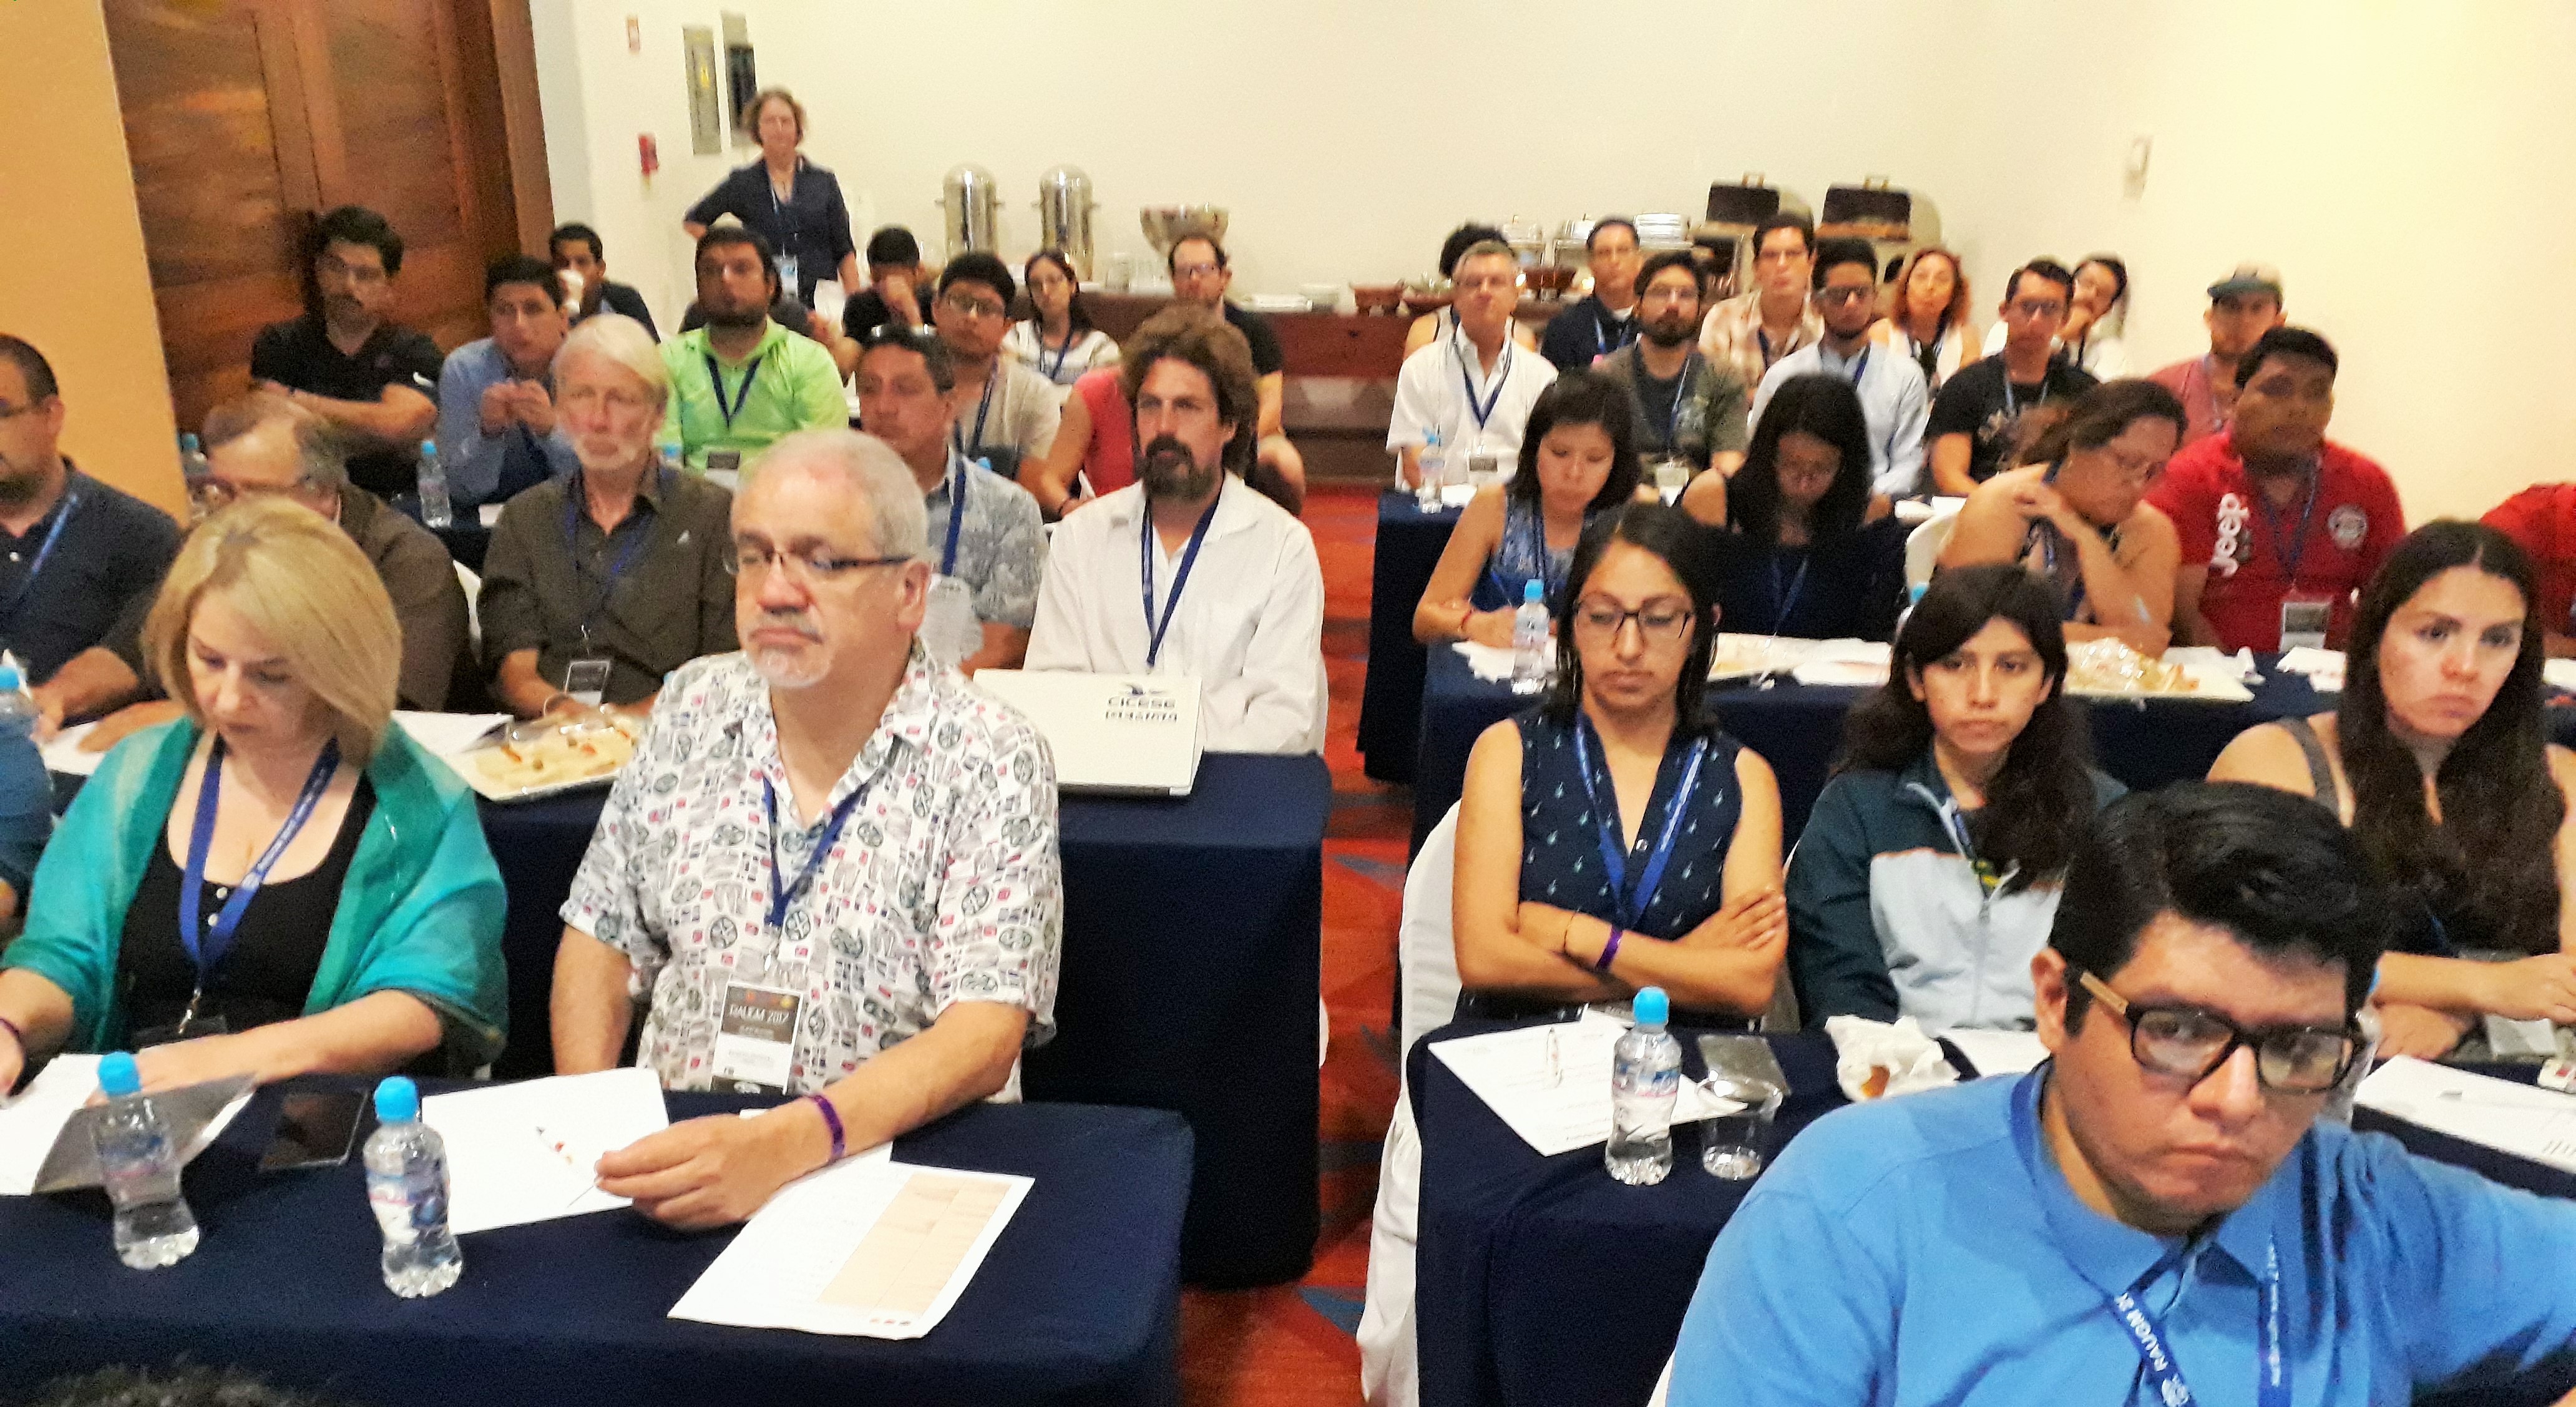 An audience of around 50 people took part in the information event in Puerto Vallarta